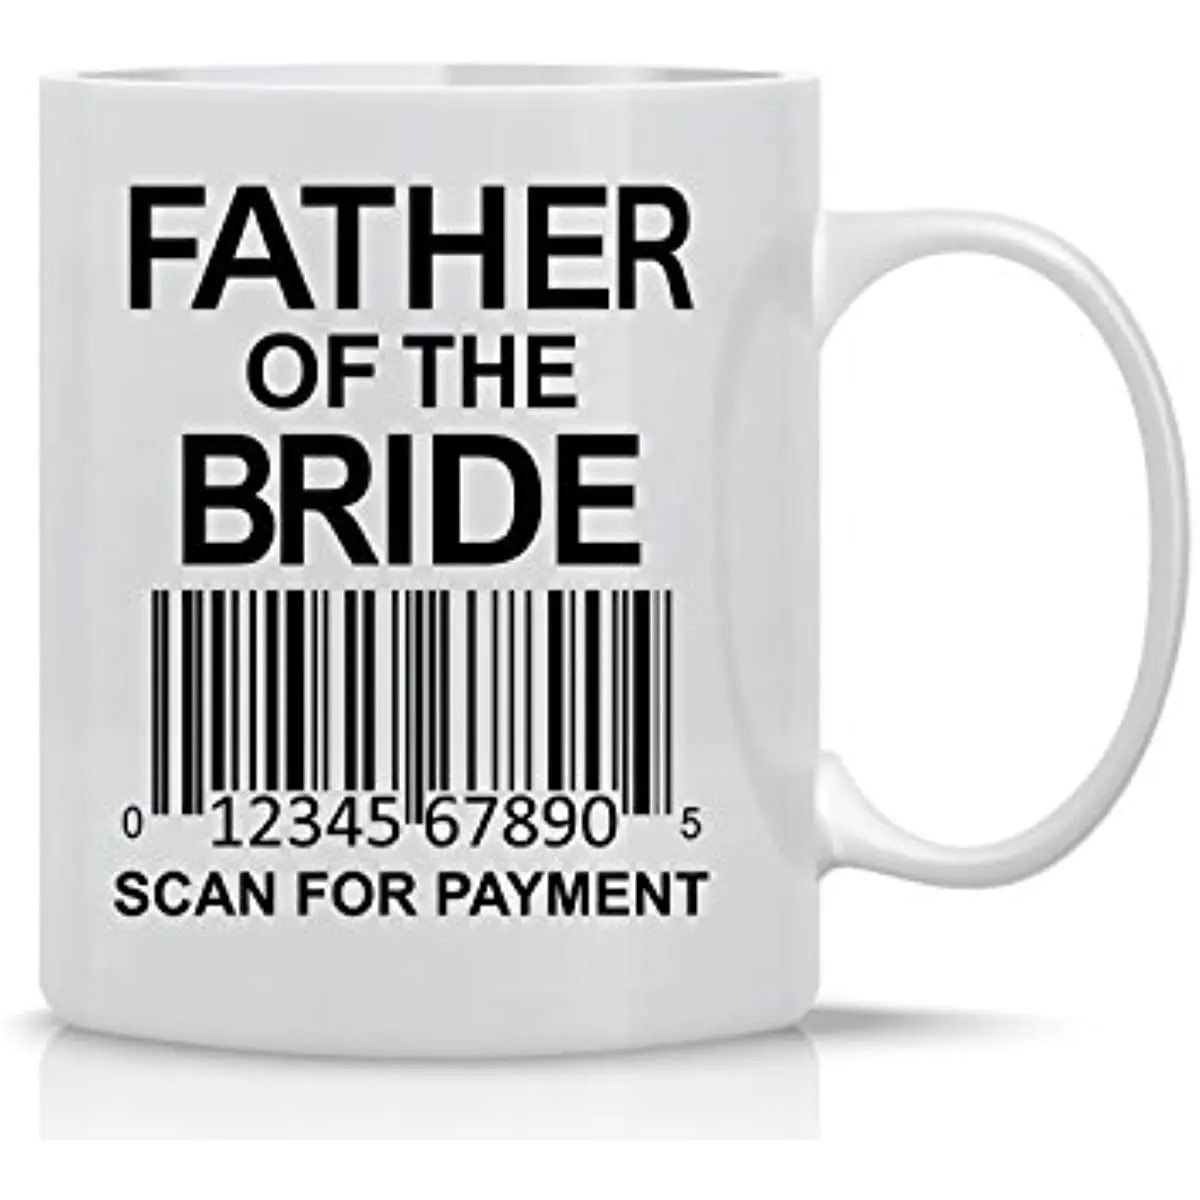 

Father Of The Bride, Scan For Payment - Funny Coffee Lovers Mug- 11OZ Coffee Mug - Mugs For Dads - Perfect For Fathers Day